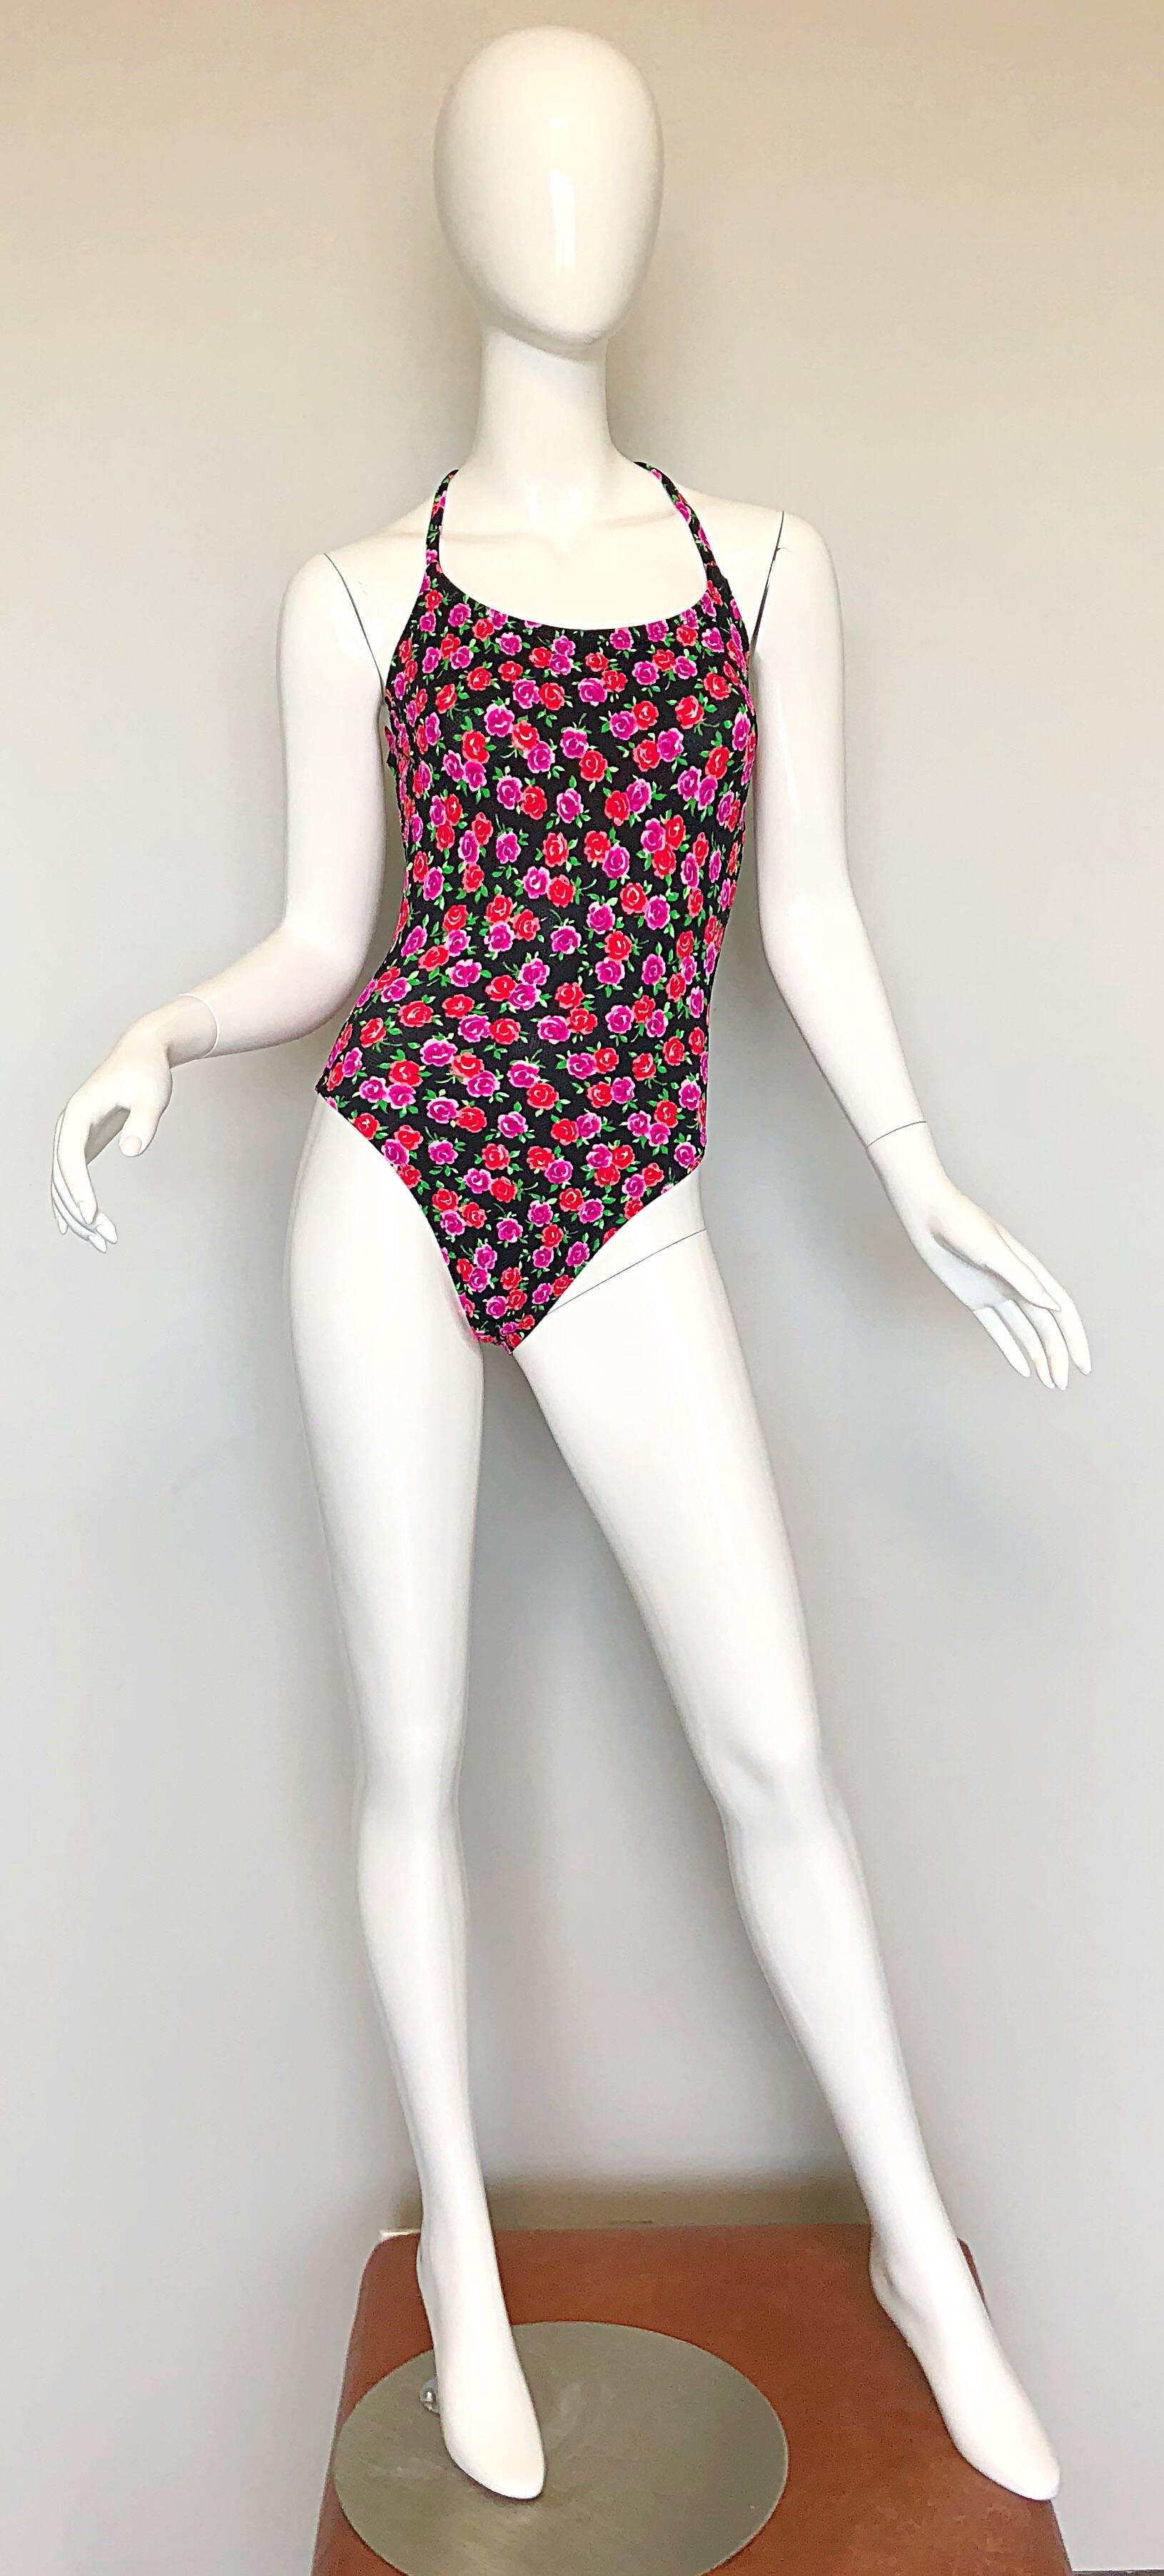 Pretty vintage early 80s COLE OF CALIFORNIA pink, red and black rose print racerback one piece swimsuit or bodysuit! Features an allover print of roses in hot pink, red, green and black. Flattering soft material stretches to fit. Racerback straps